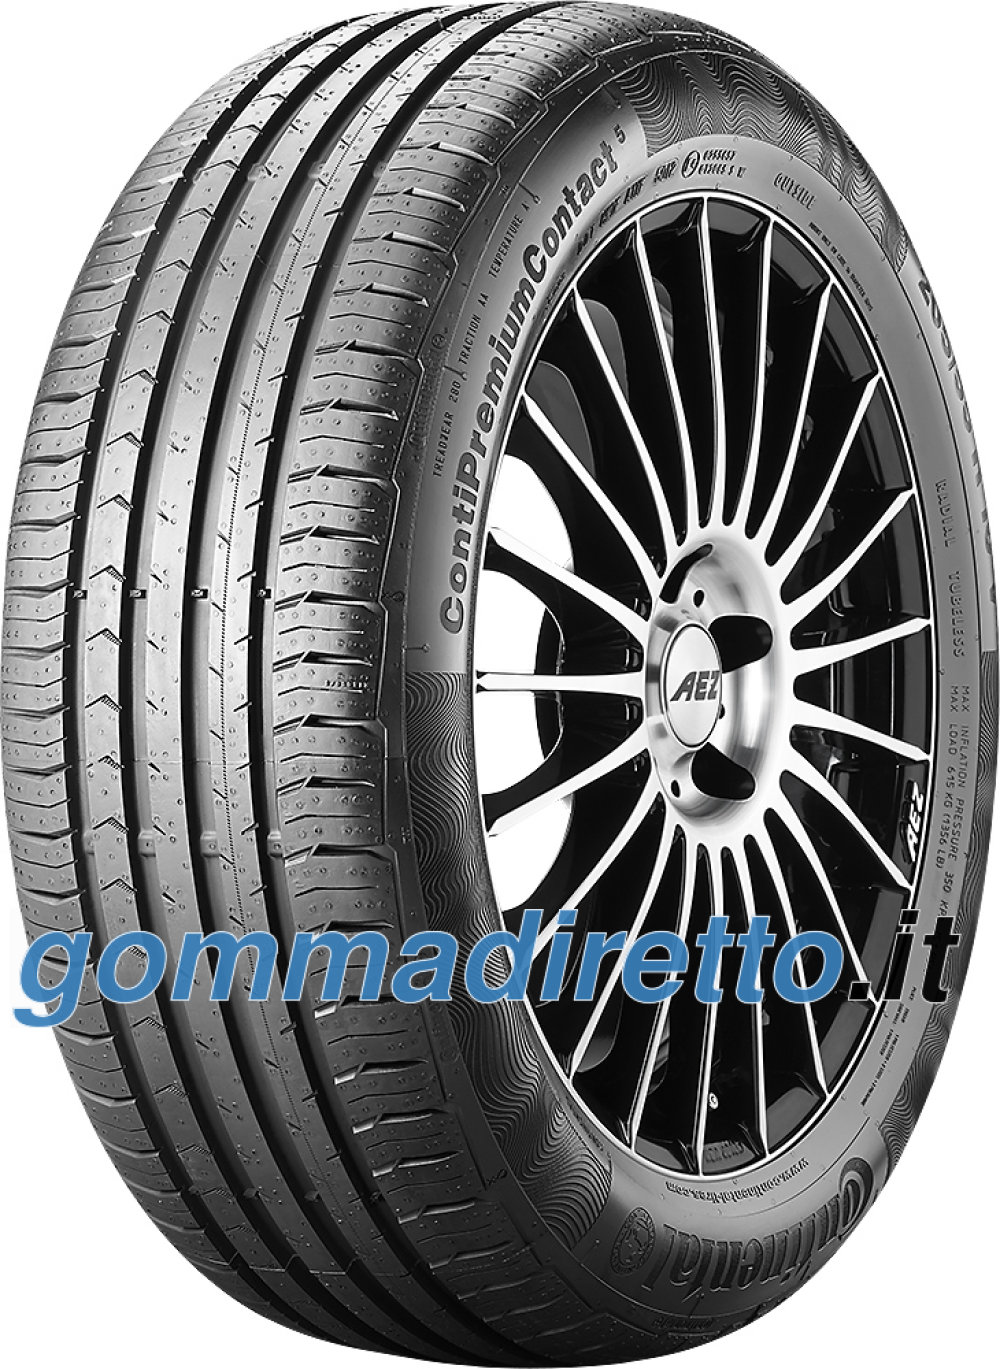 Image of Continental ContiPremiumContact 5 ( 225/55 R17 97W Conti Seal )